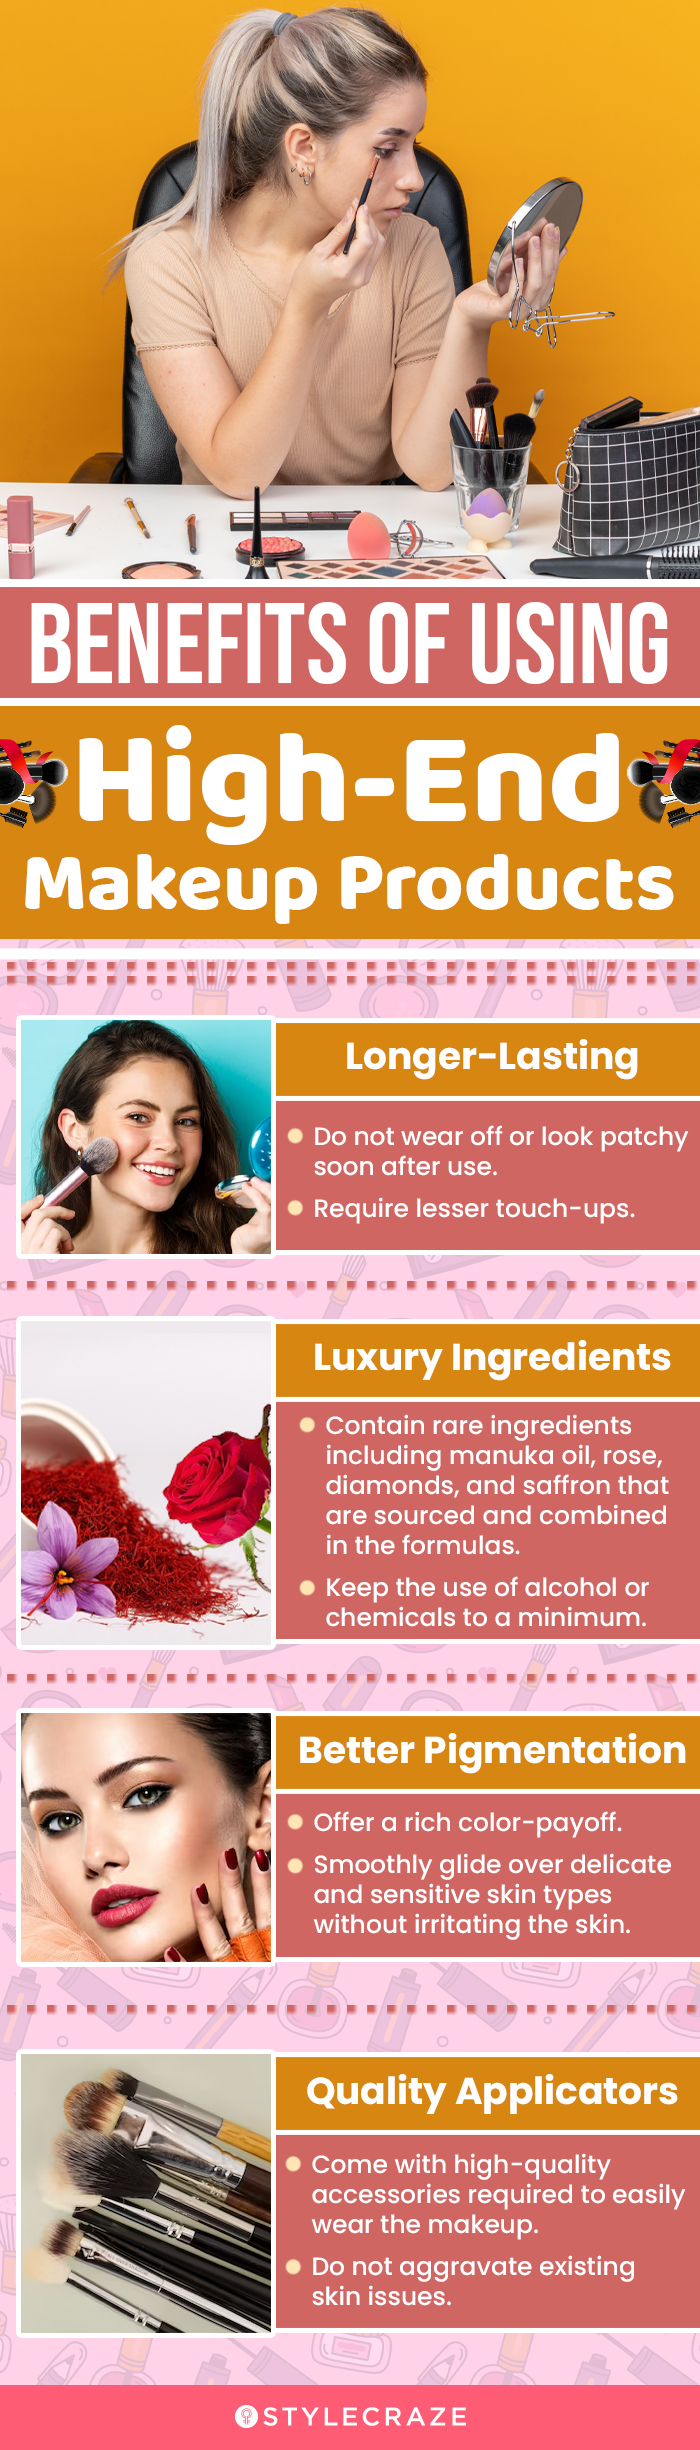 Benefits Of Using High-End Makeup Products (infographic)